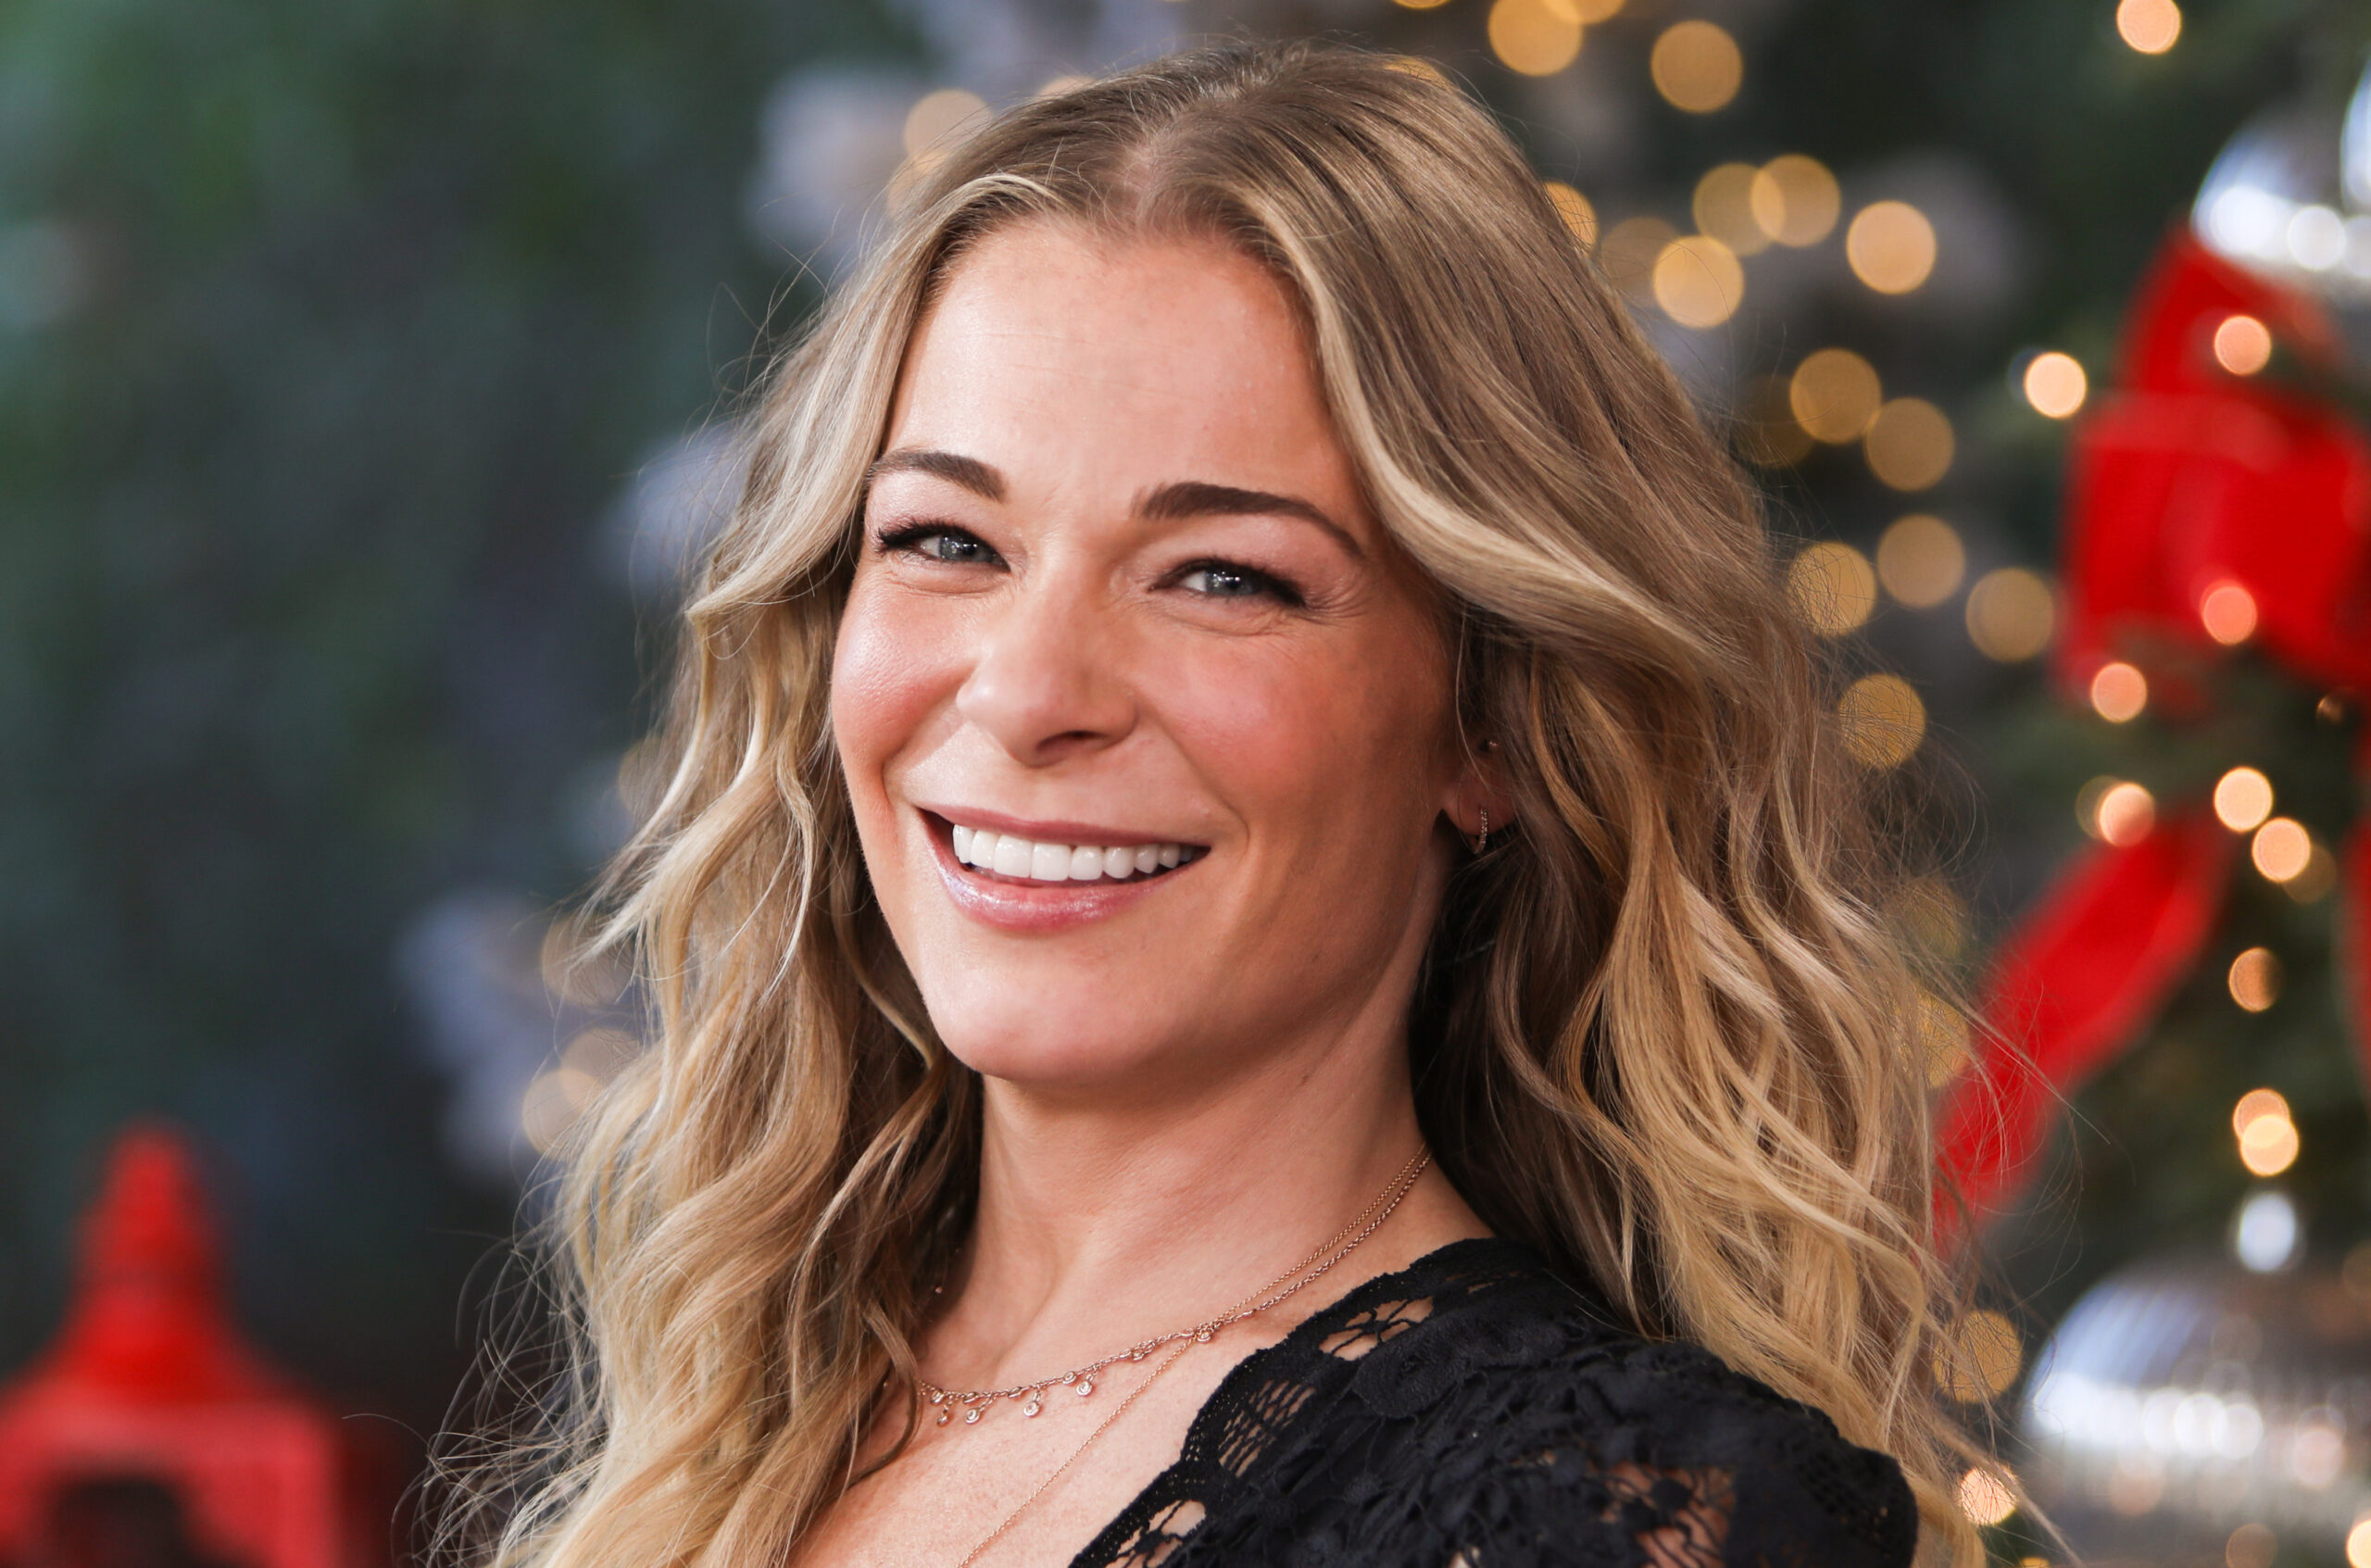 LeAnn Rimes Says She ‘Missed Out On A Lot Of Things’ In Her Childhood When She Became A Star At Such A Young Age